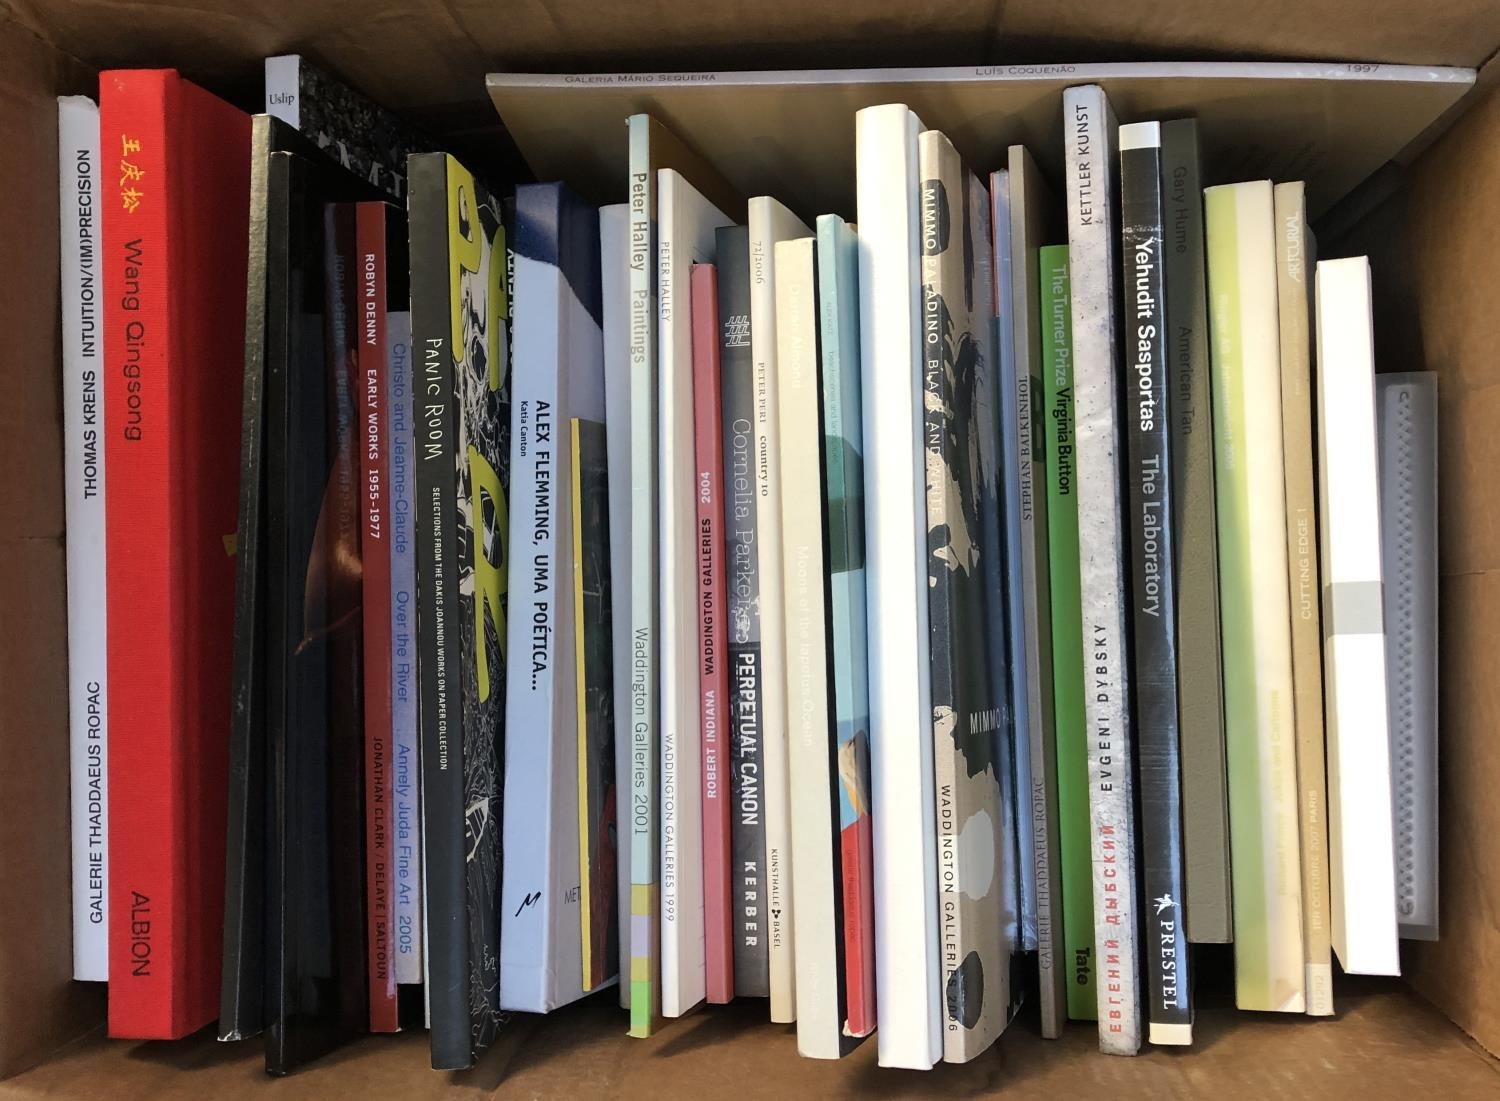 ART CATALOGUES: two boxes of modern, post-modern and contemporary art catalogues including Robyn - Image 2 of 2